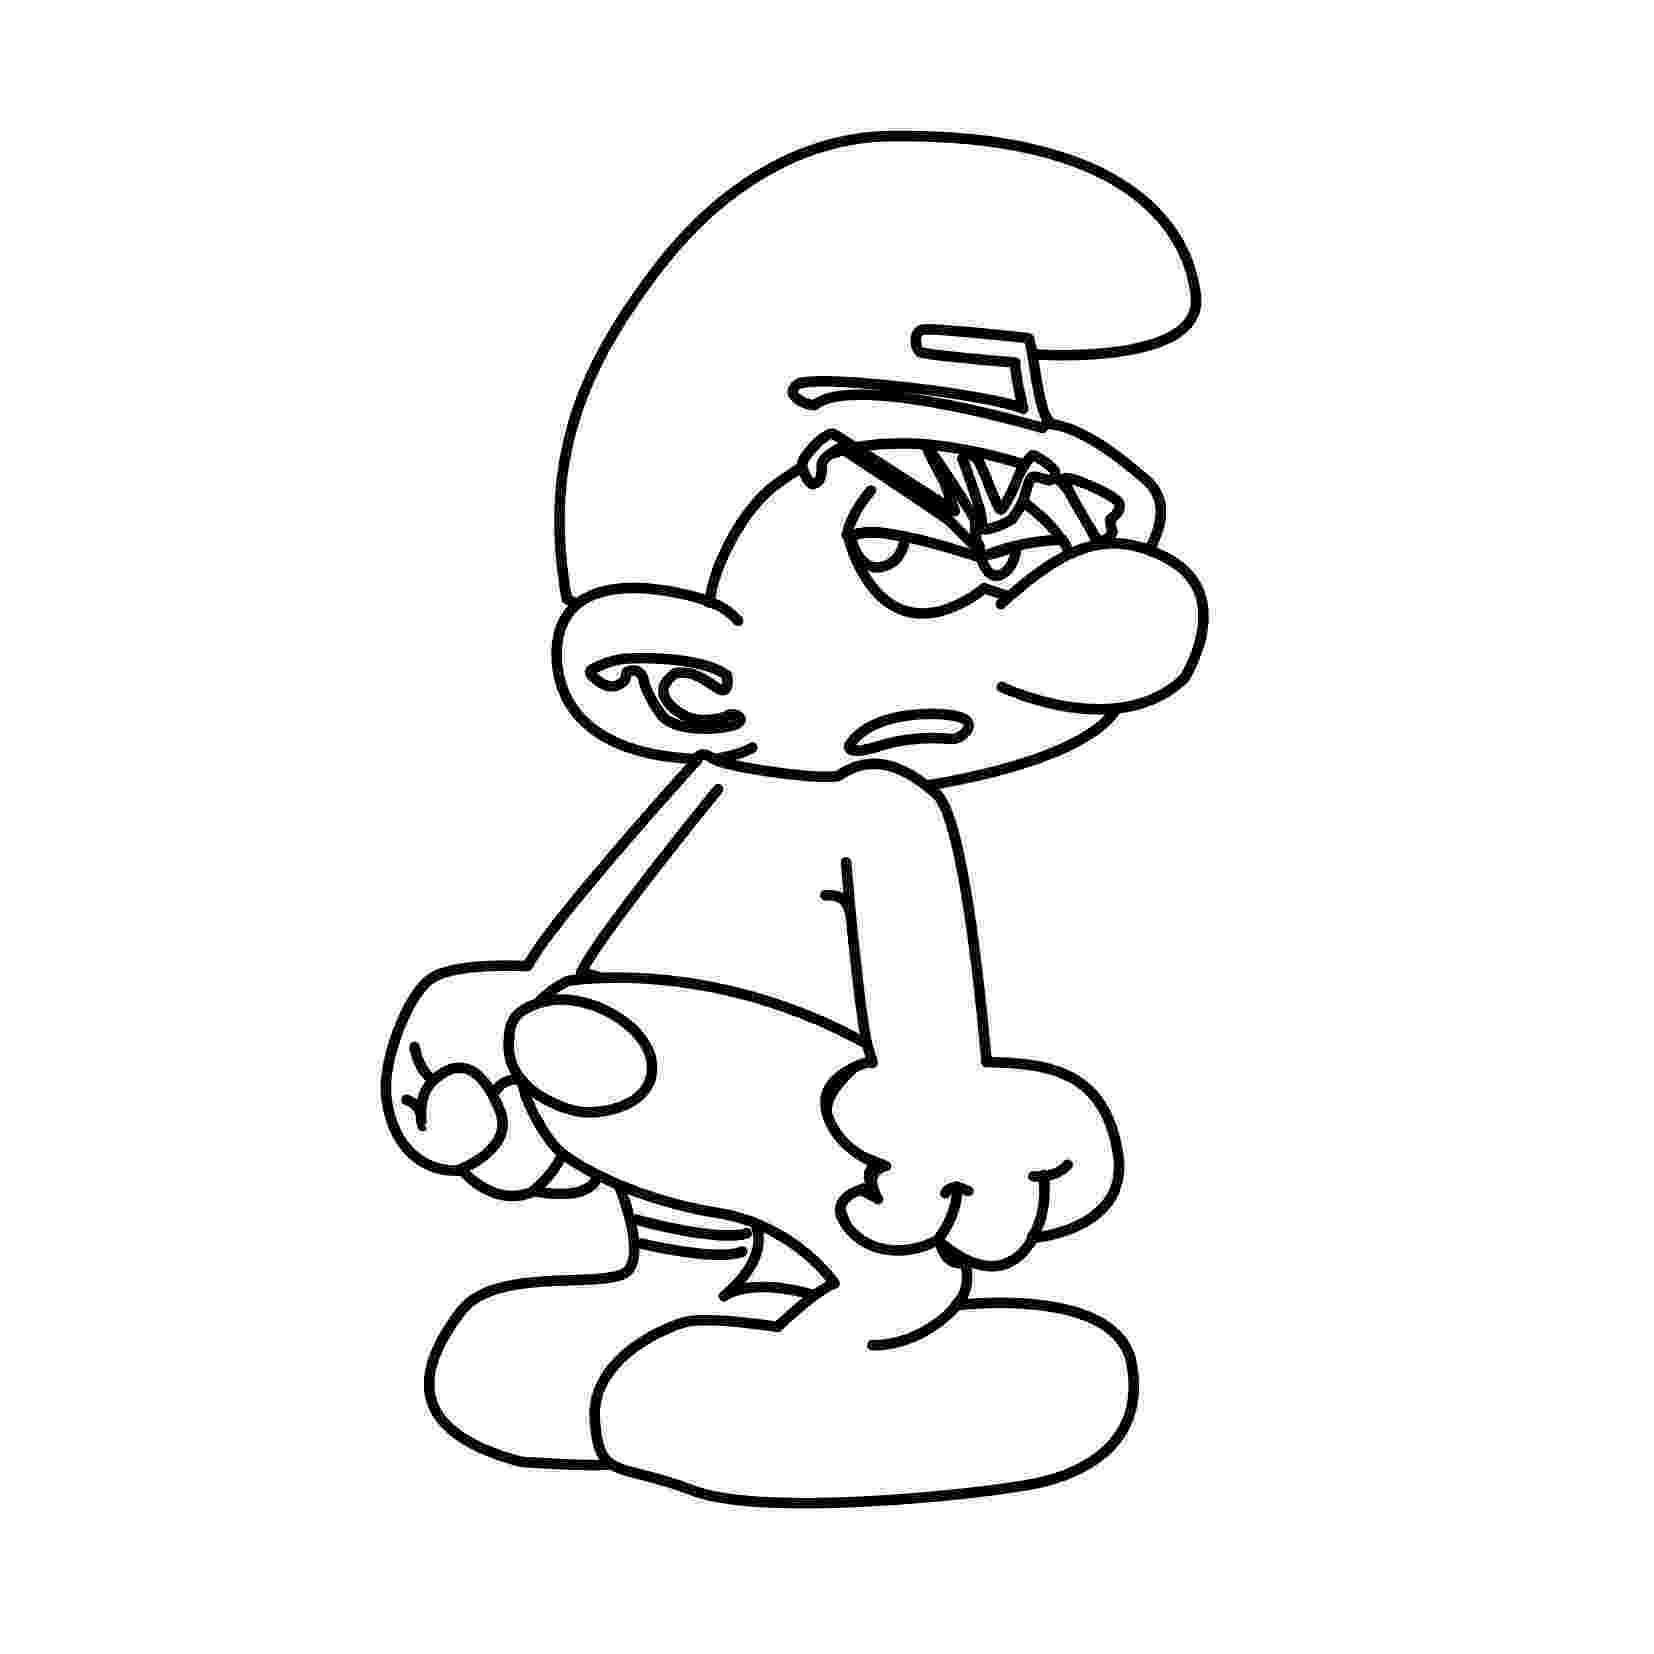 smurf pictures free printable smurf coloring pages for kids pictures smurf 1 3